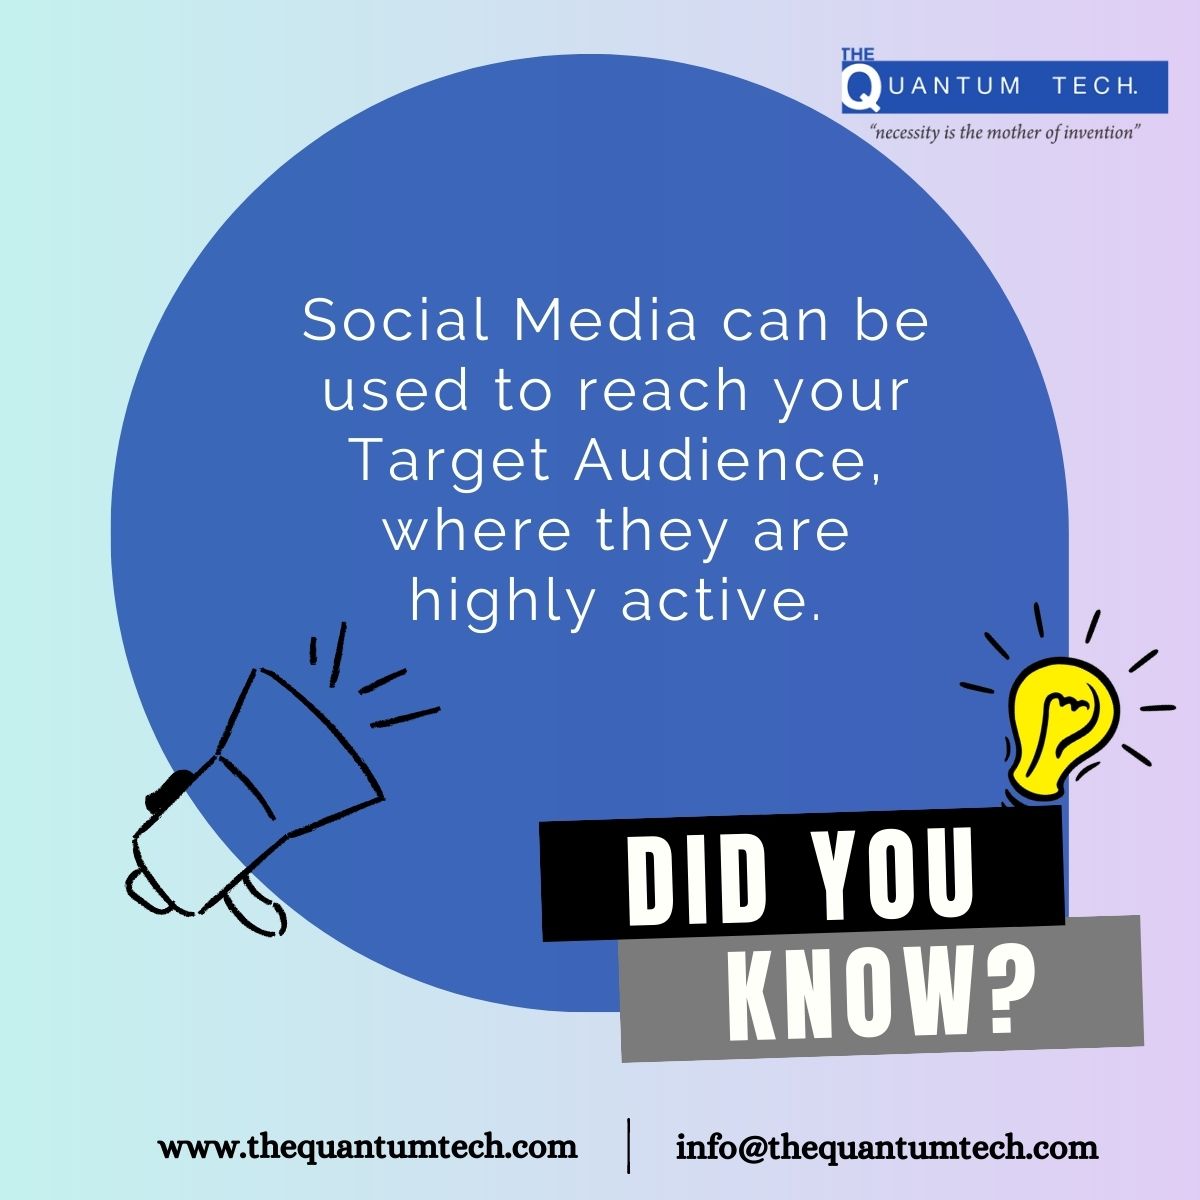 Social media is one of the most powerful tools for reaching your target audience...!!
.
.
.
#thequantumtech #innovation  #socialmediamarketing #socialmediamanagement #socialmediastrategy #audienceengagement  #socialmediahacks #targetaudience #socialmediagoals #socialmediasuccess